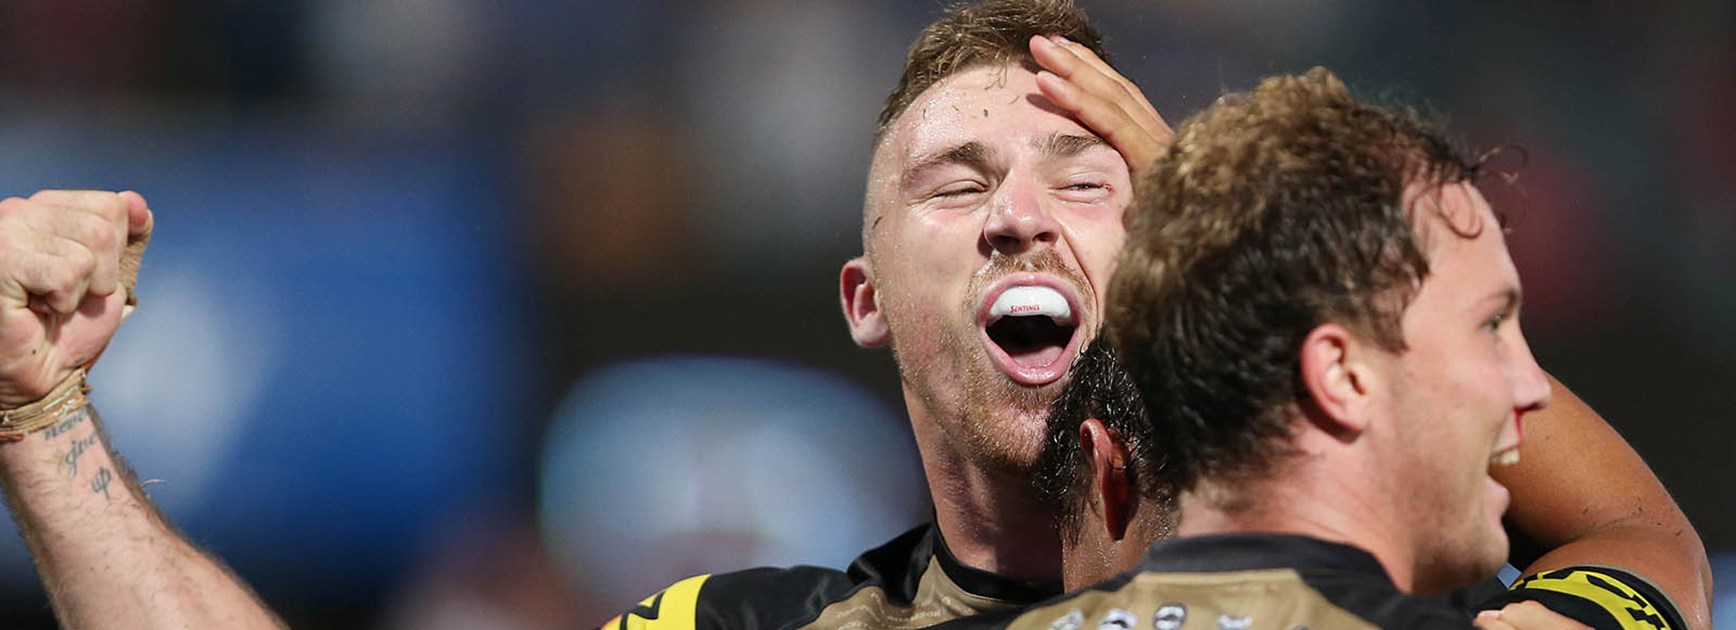 A stunning try after the siren to Panthers back-rower Bryce Cartwright has stolen a win in the battle of the west at Pirtek Stadium.